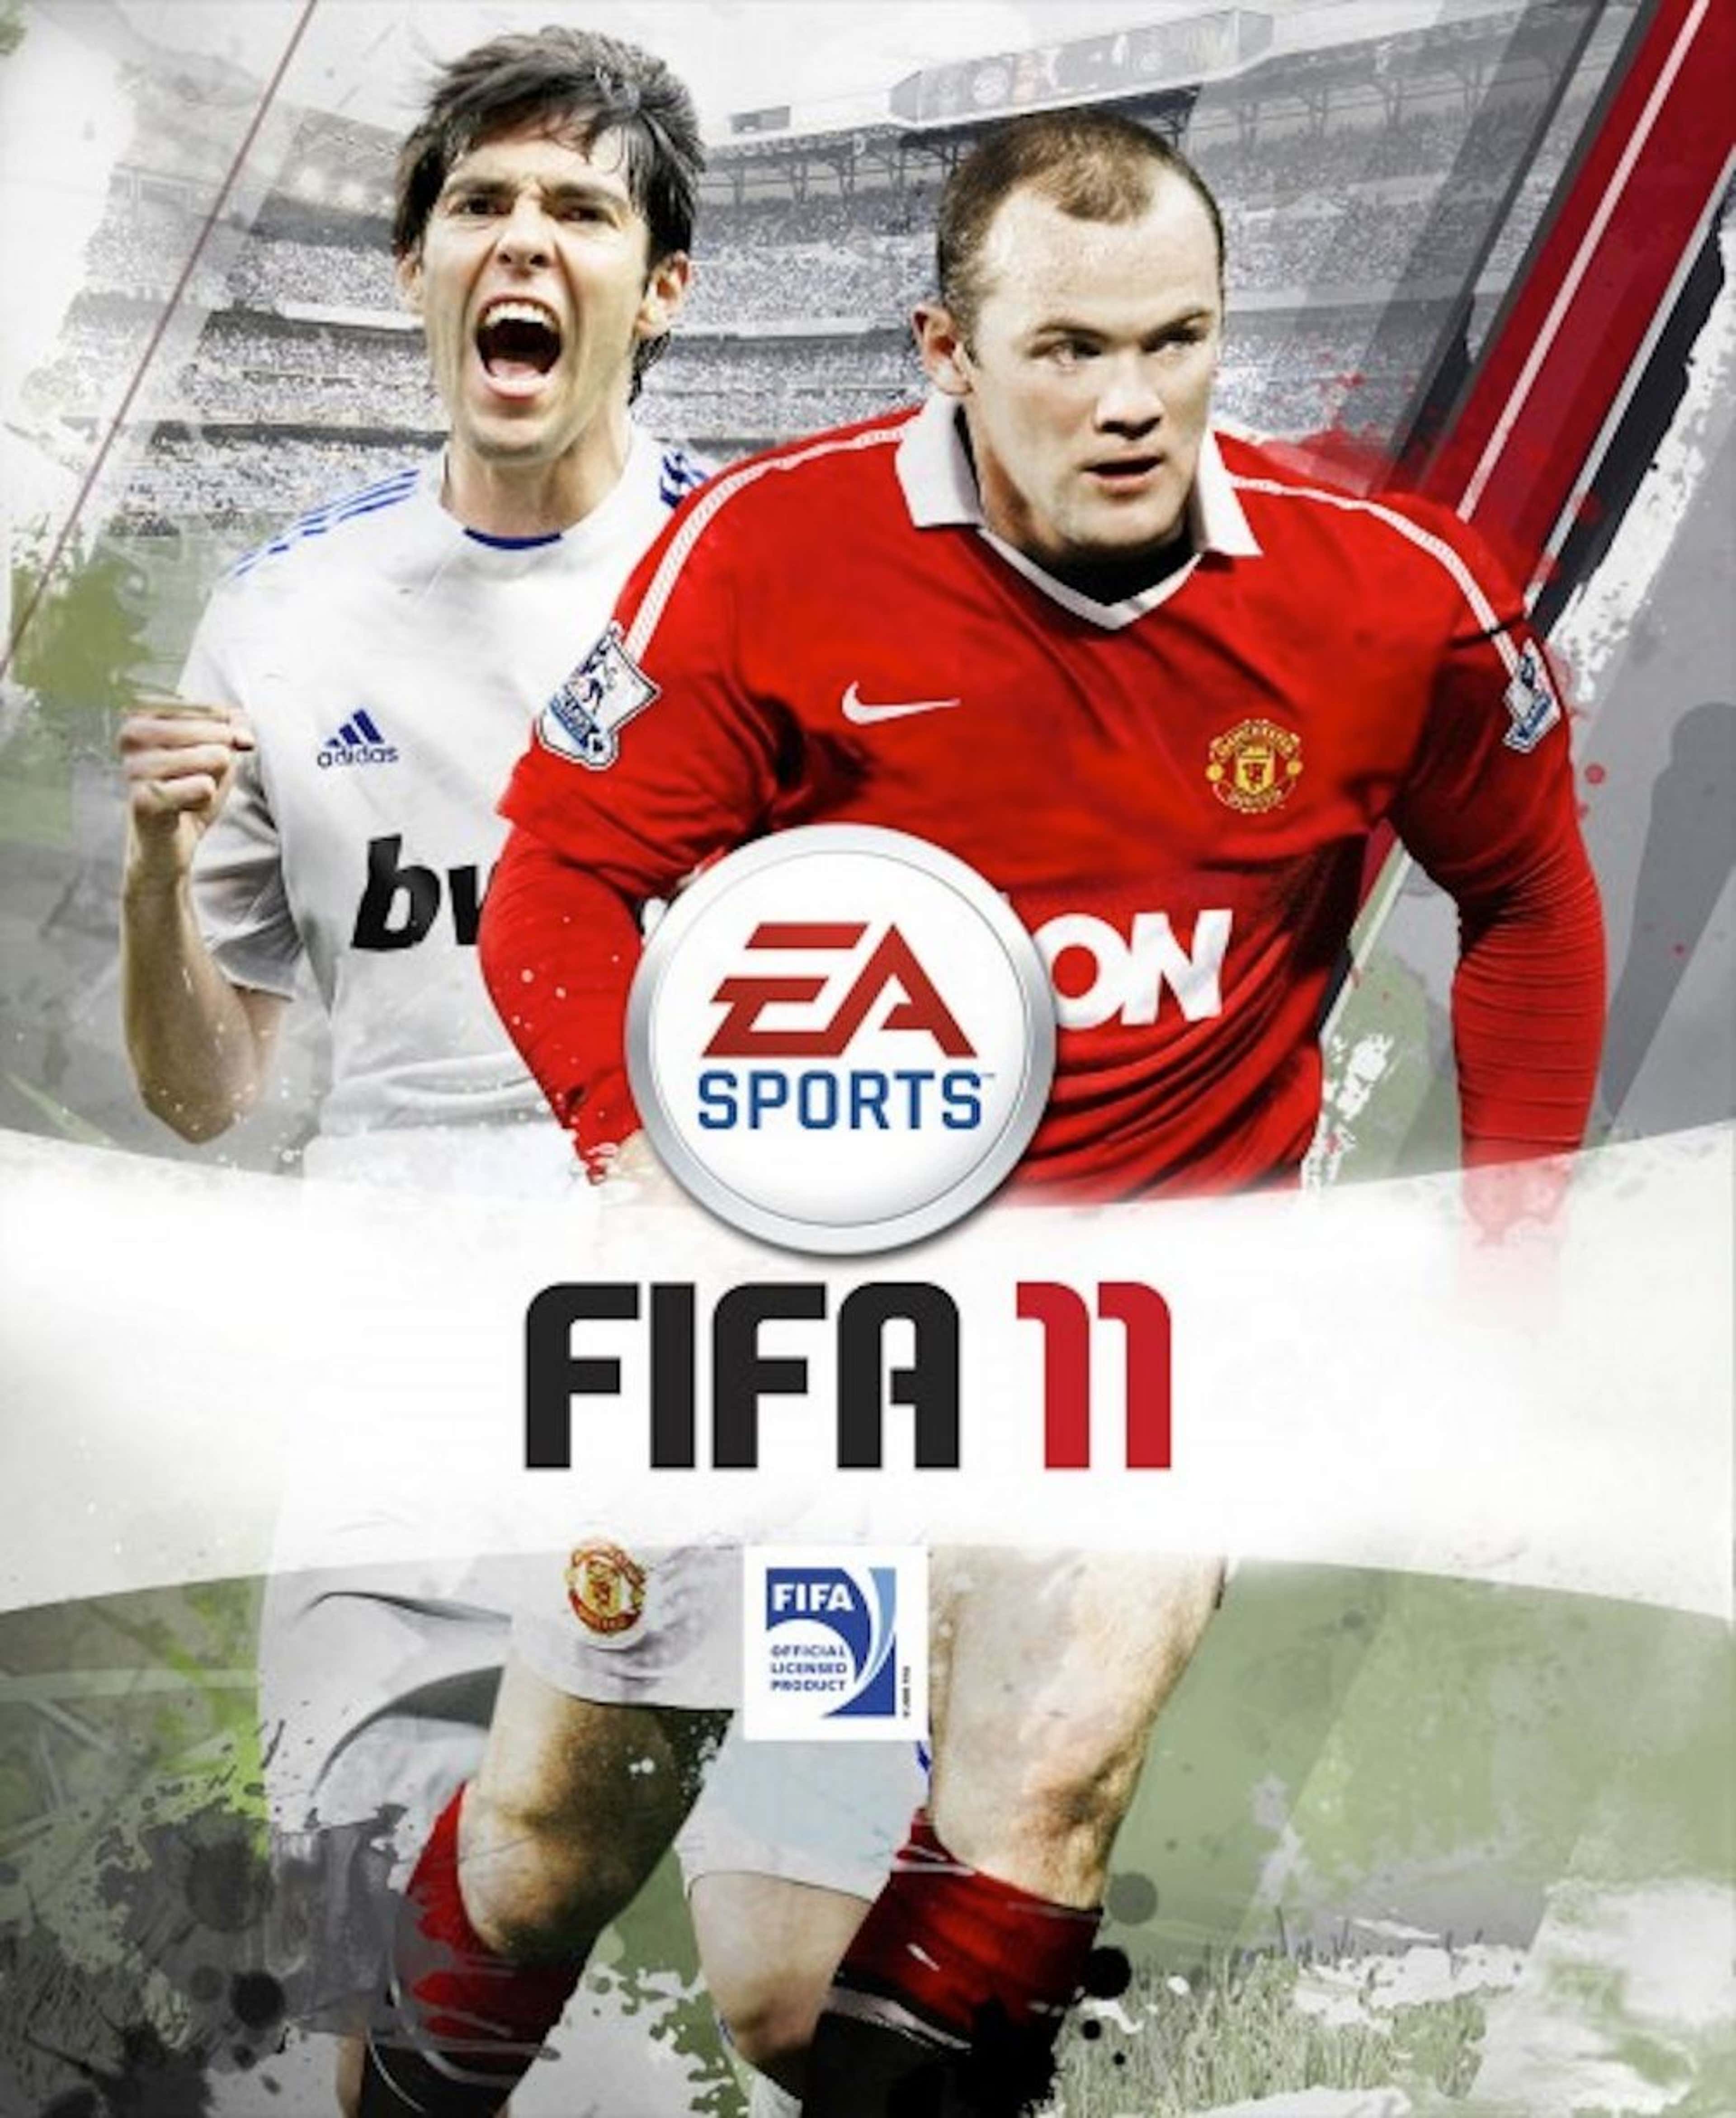 FIFA 23: Every FIFA video game cover since inception